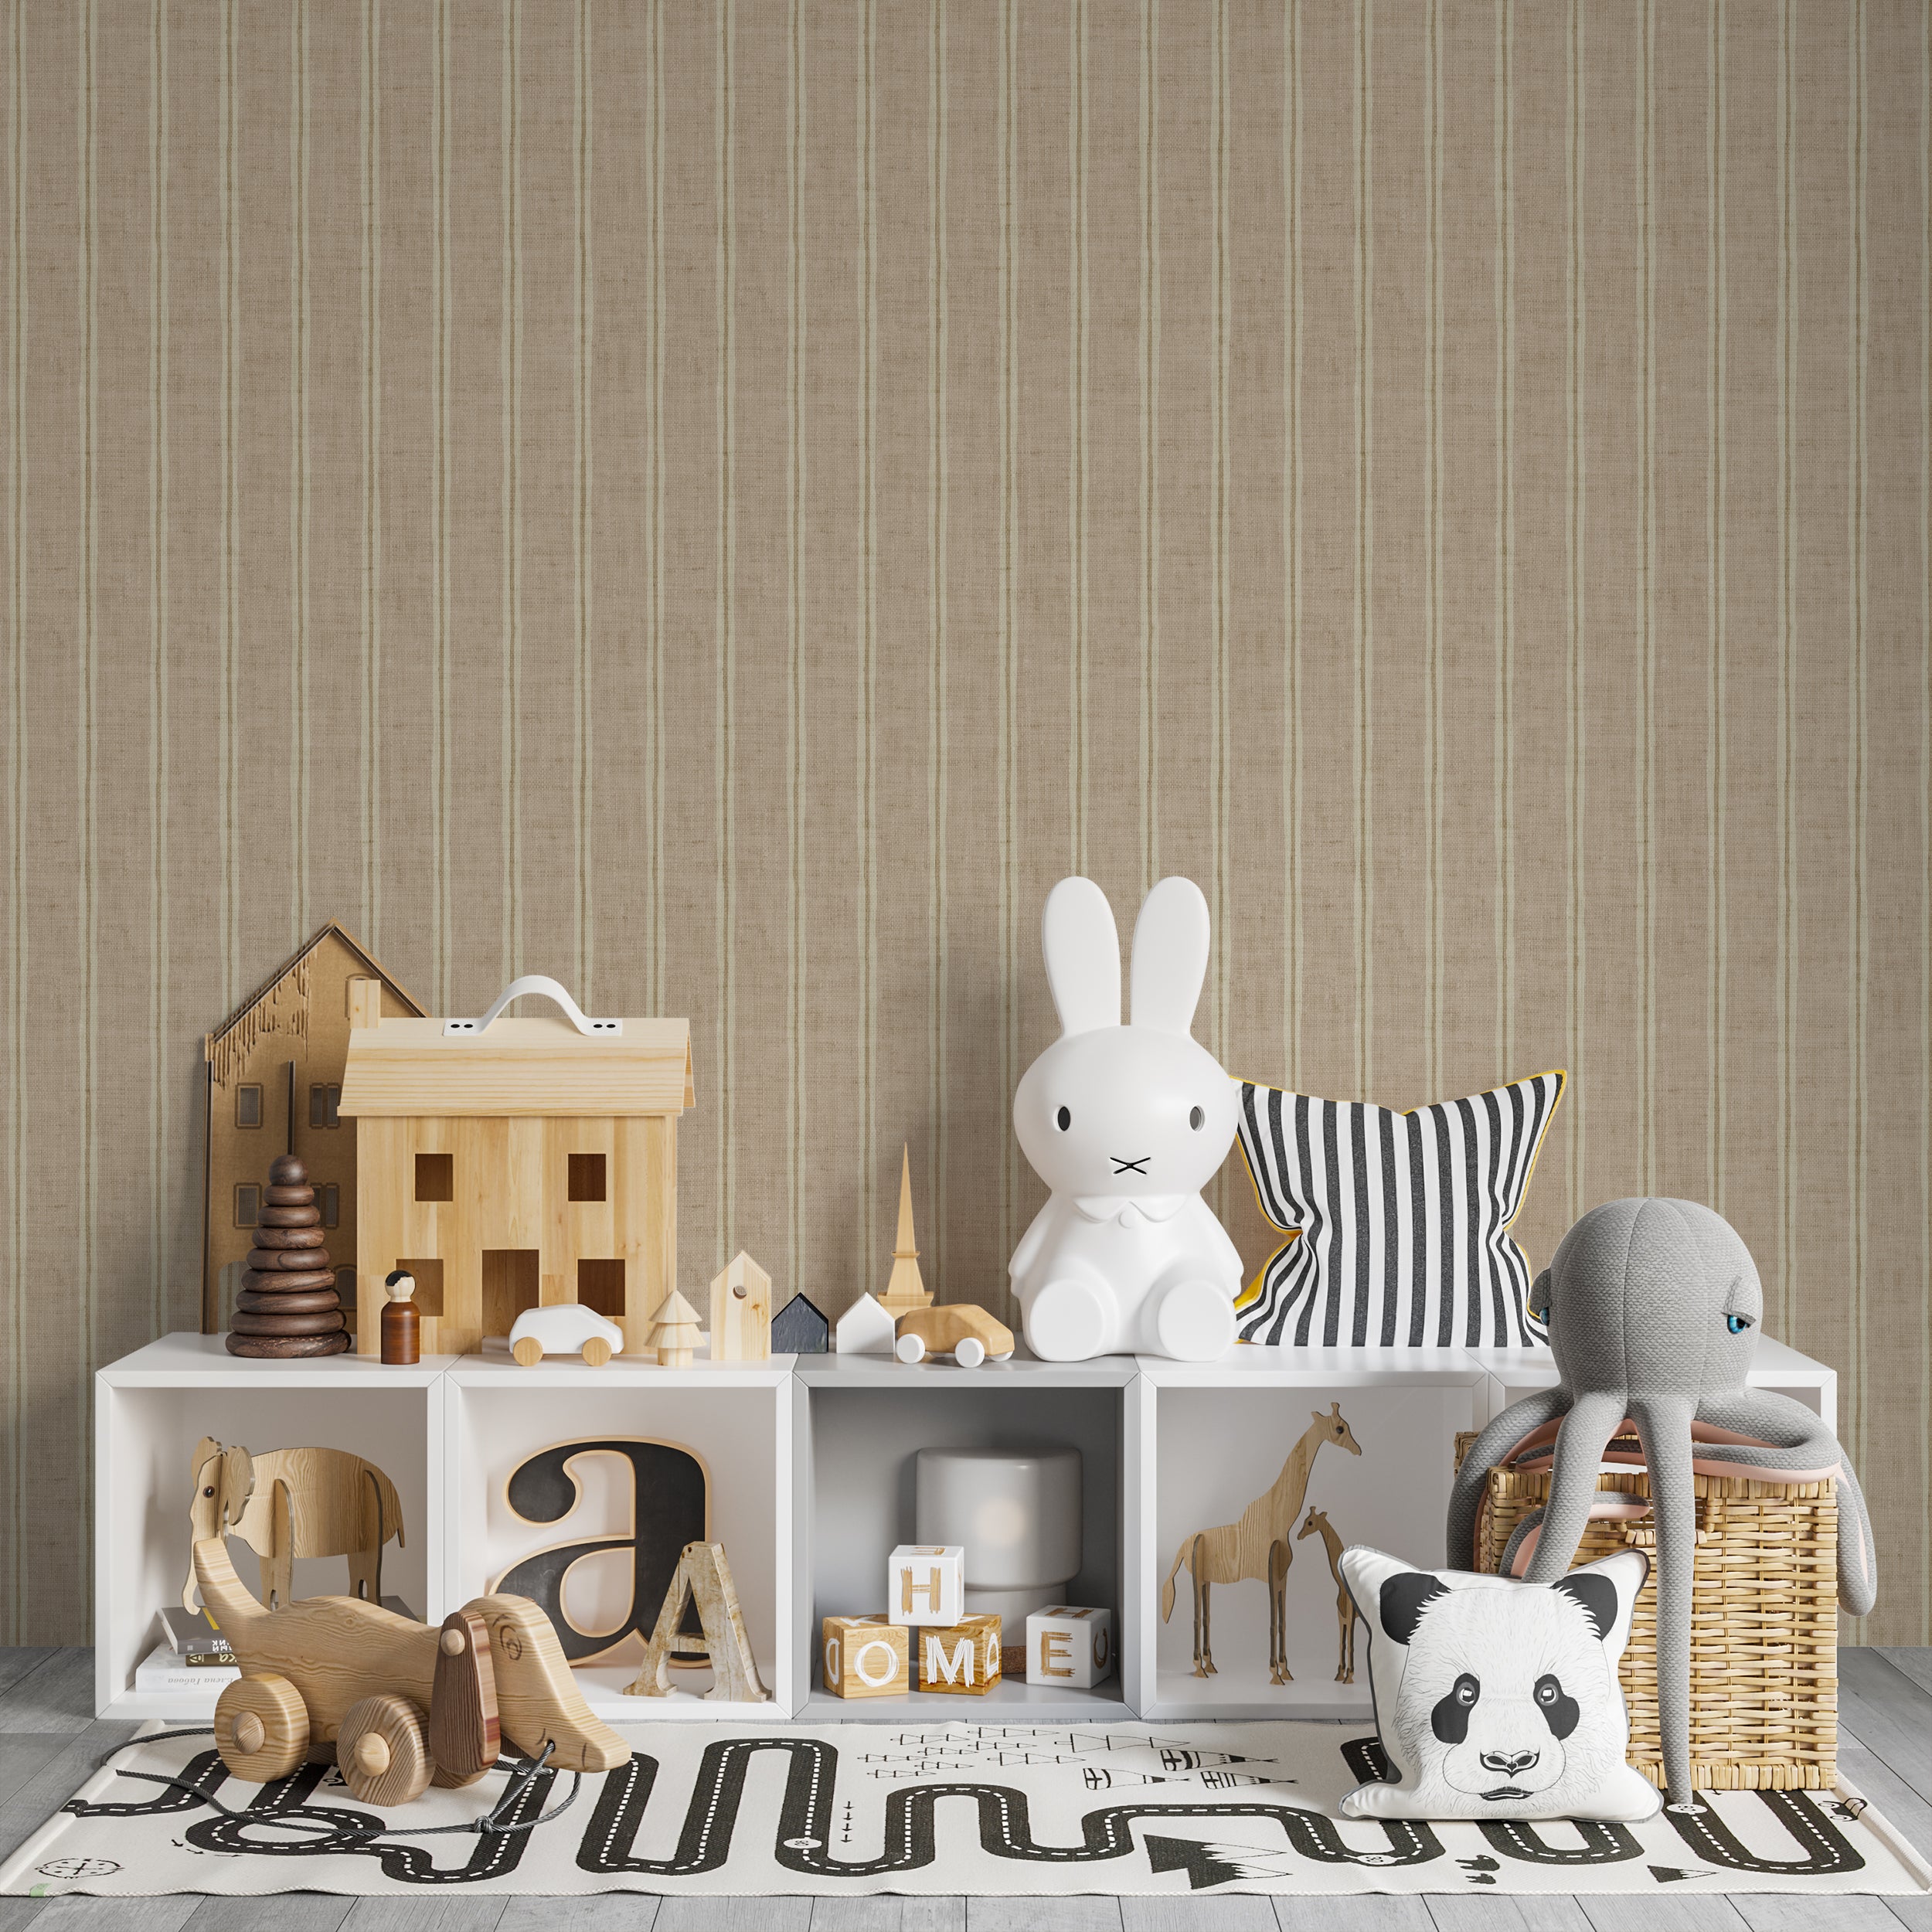 A children's play area featuring the 'Ticking Fabrics 2 Wallpaper' which provides a neutral backdrop with its beige and cream ticking stripes. The pattern complements the playful assortment of toys and stuffed animals arranged on the white cubby storage and adds a sophisticated yet playful atmosphere to the room.